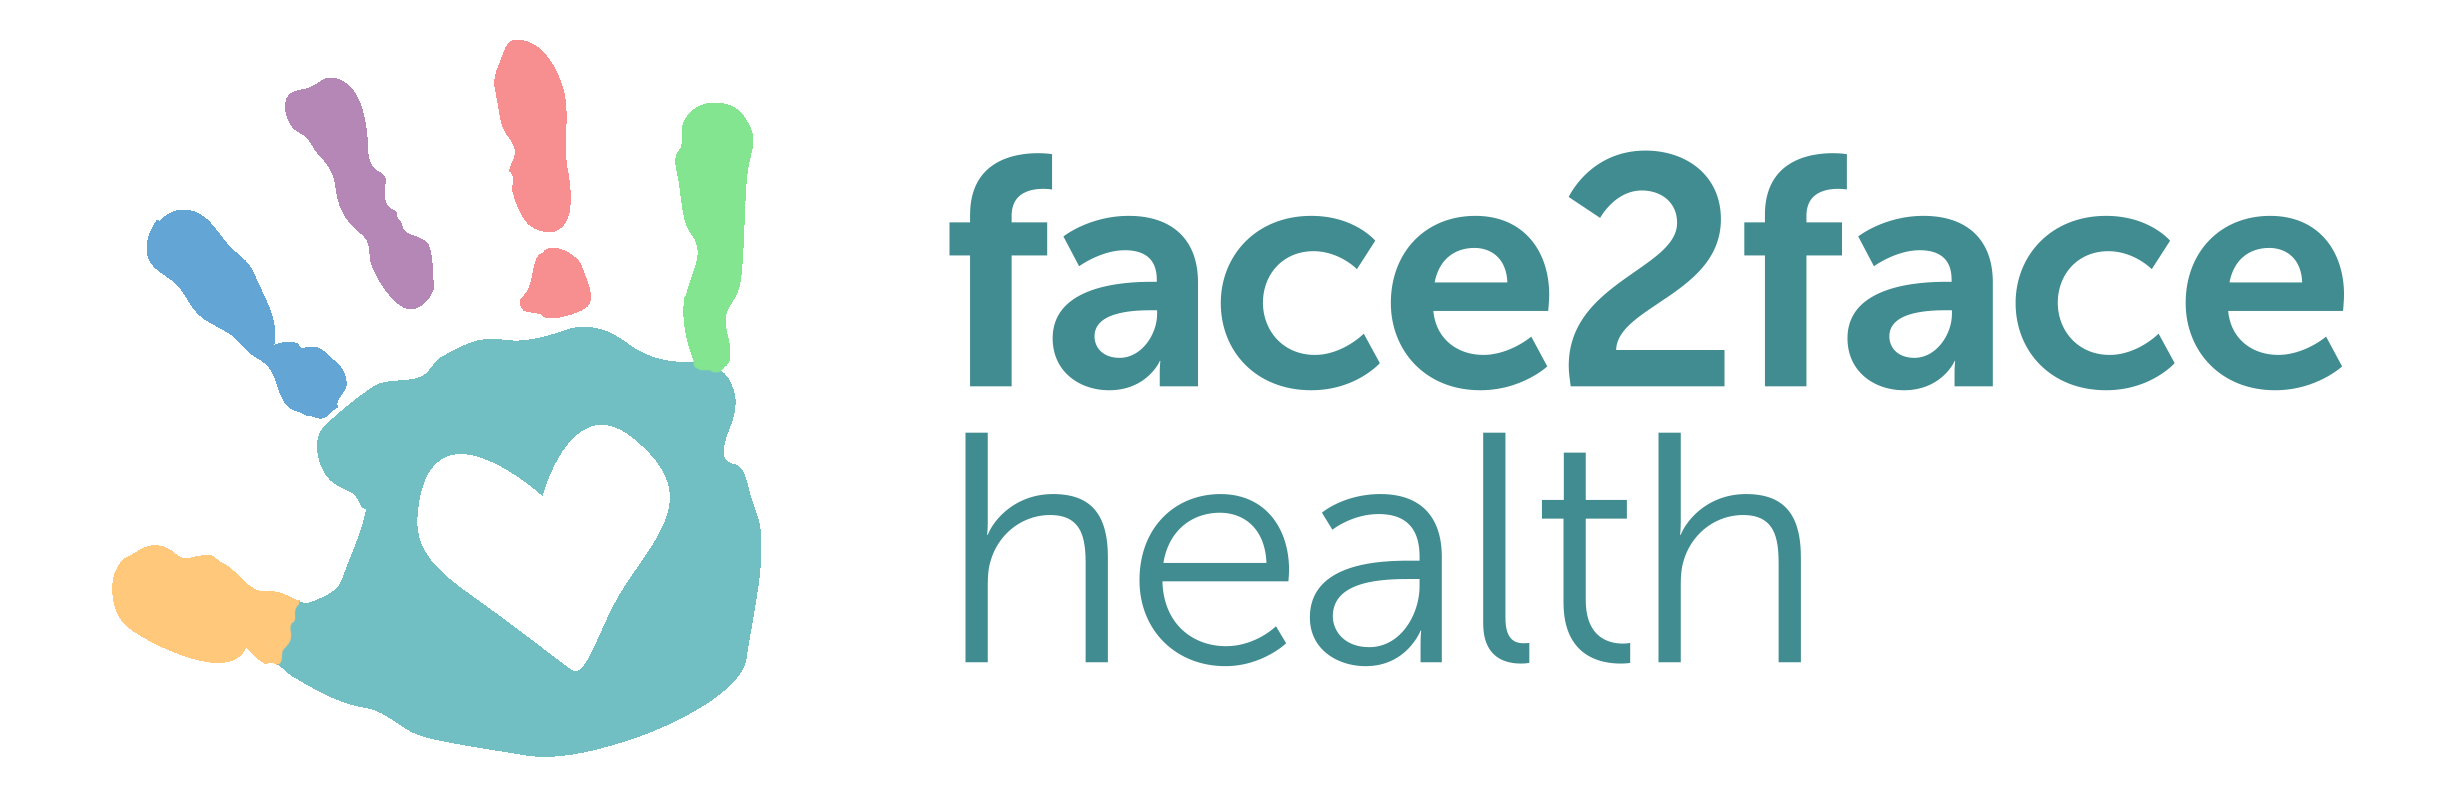 Face2Face Health, Tuesday, June 22, 2021, Press release picture